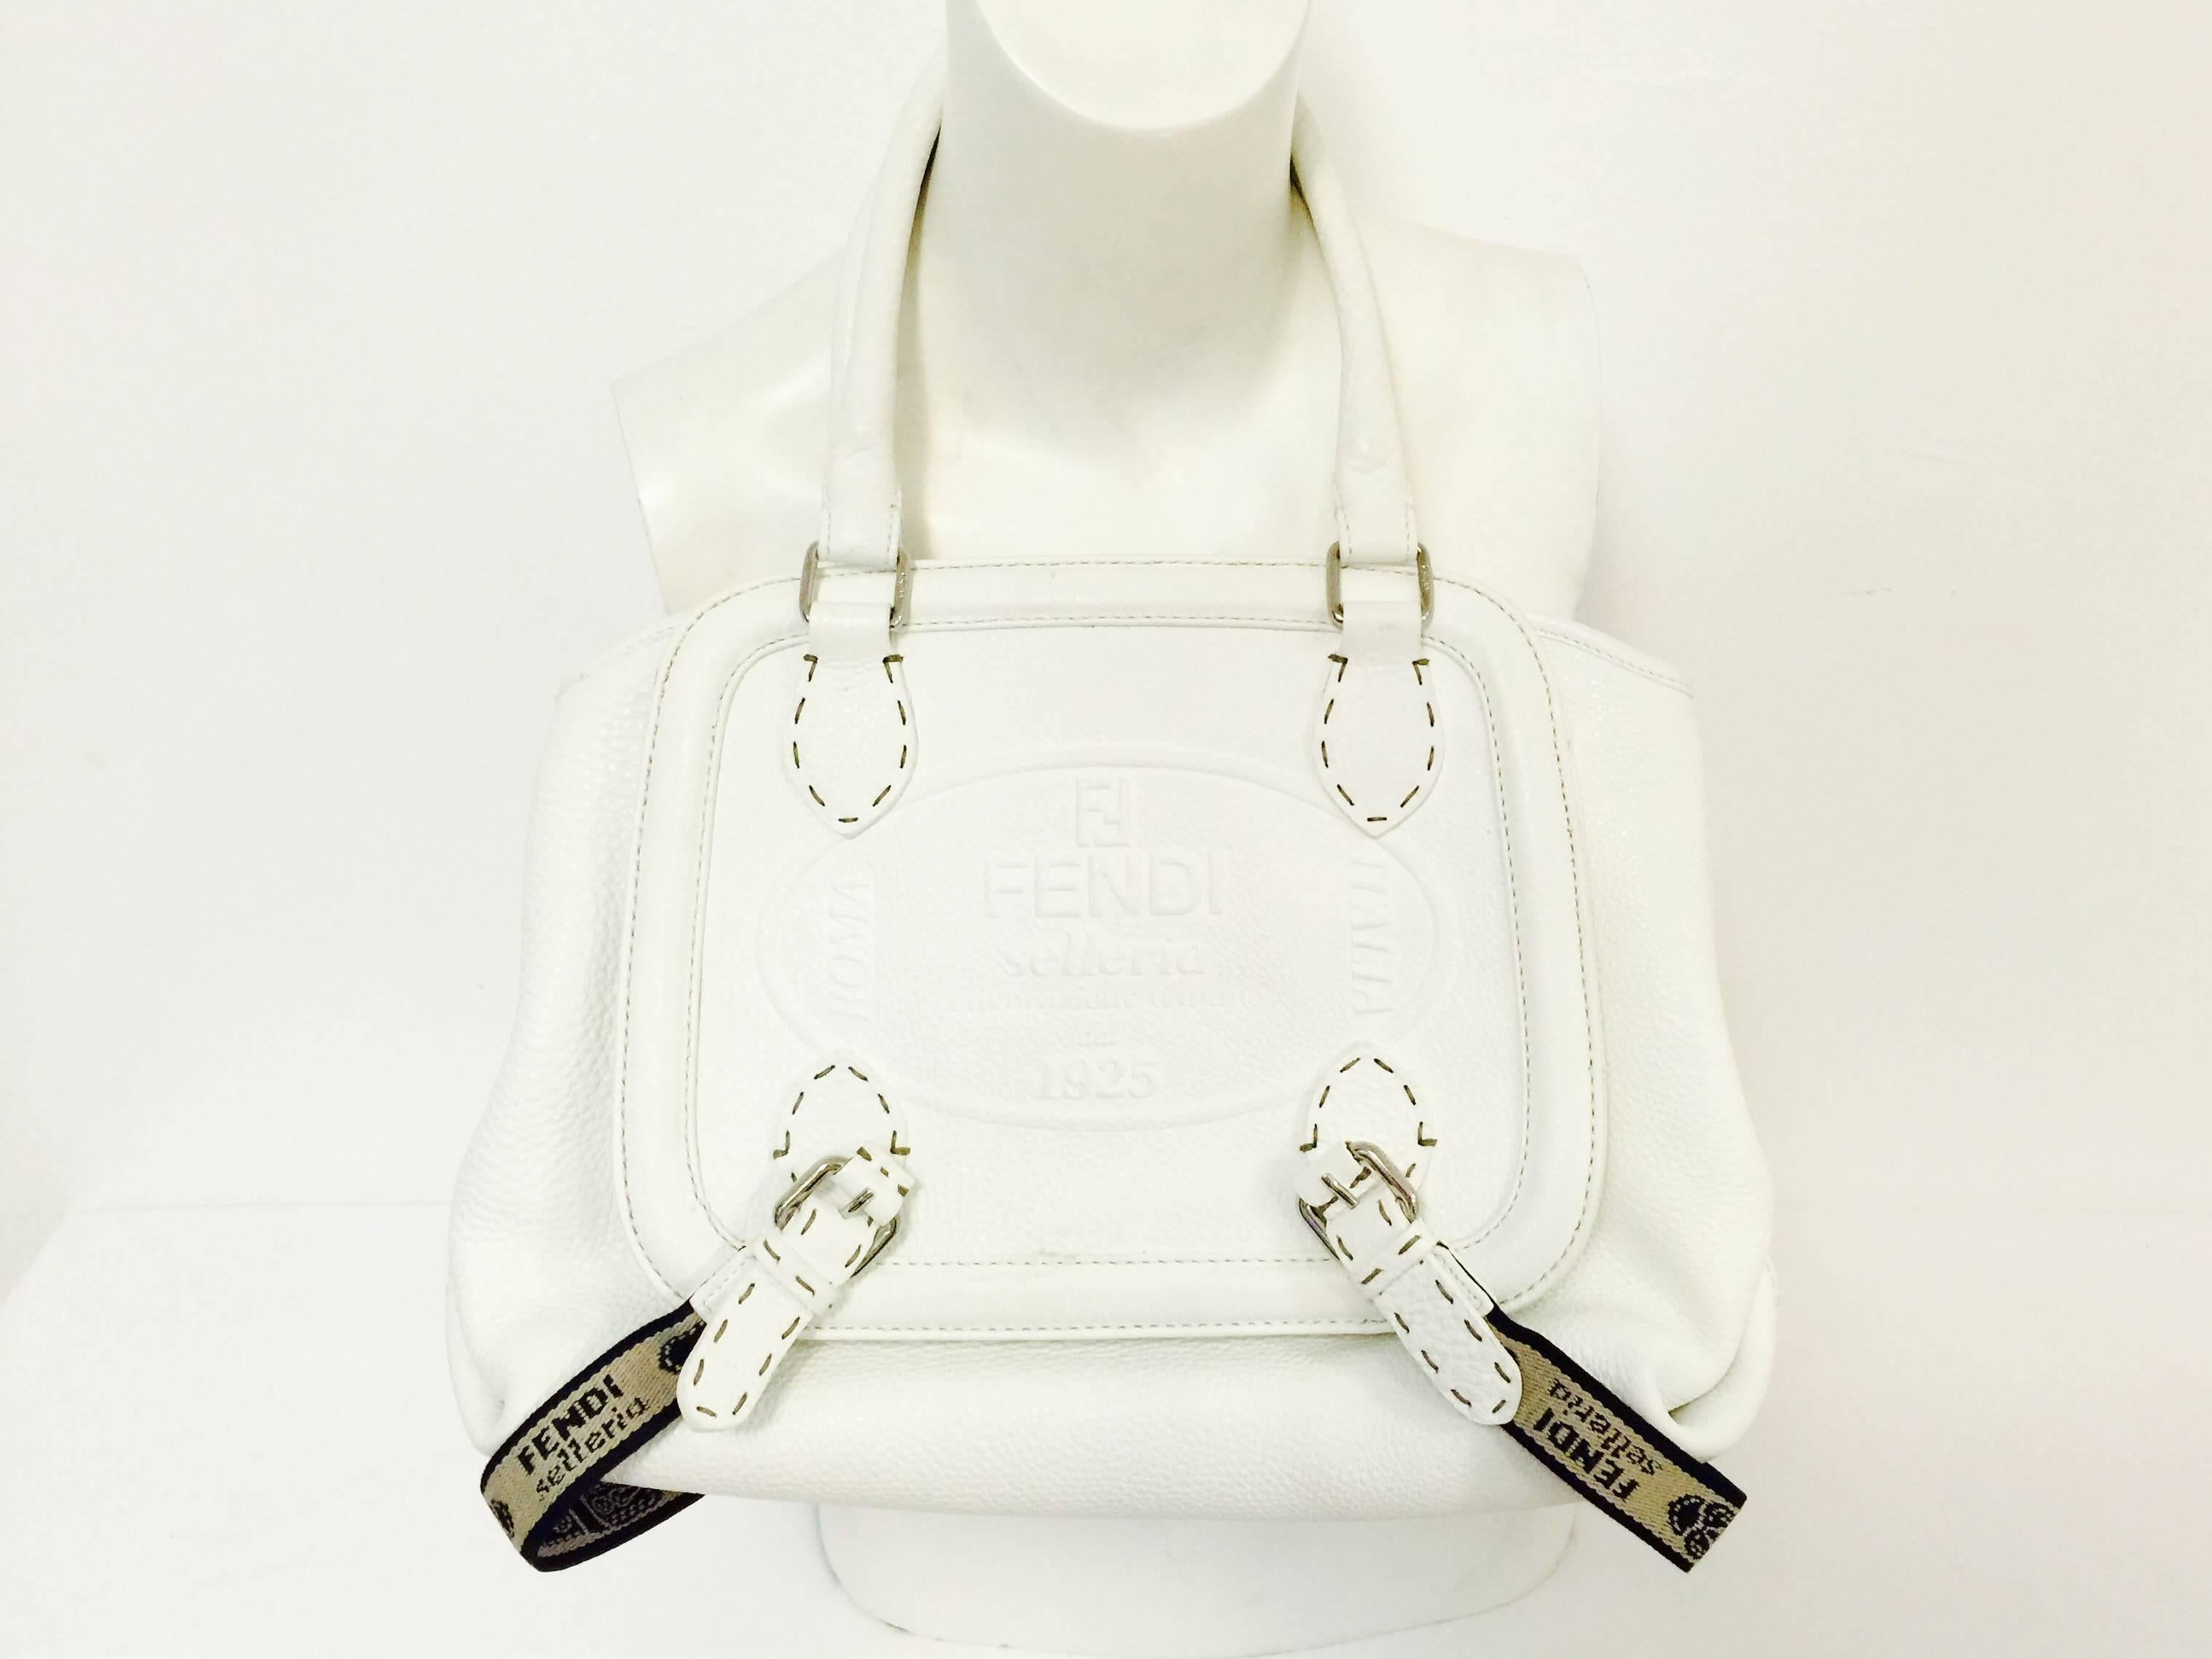 Fendi Selleria White Grained Leather Satchel With Staps is a must for connoisseurs of fine handbags in general and Fendi in particular!  "Selleria"...reserved for Fendi's most luxurious line of handbags, features extensive hand crafting